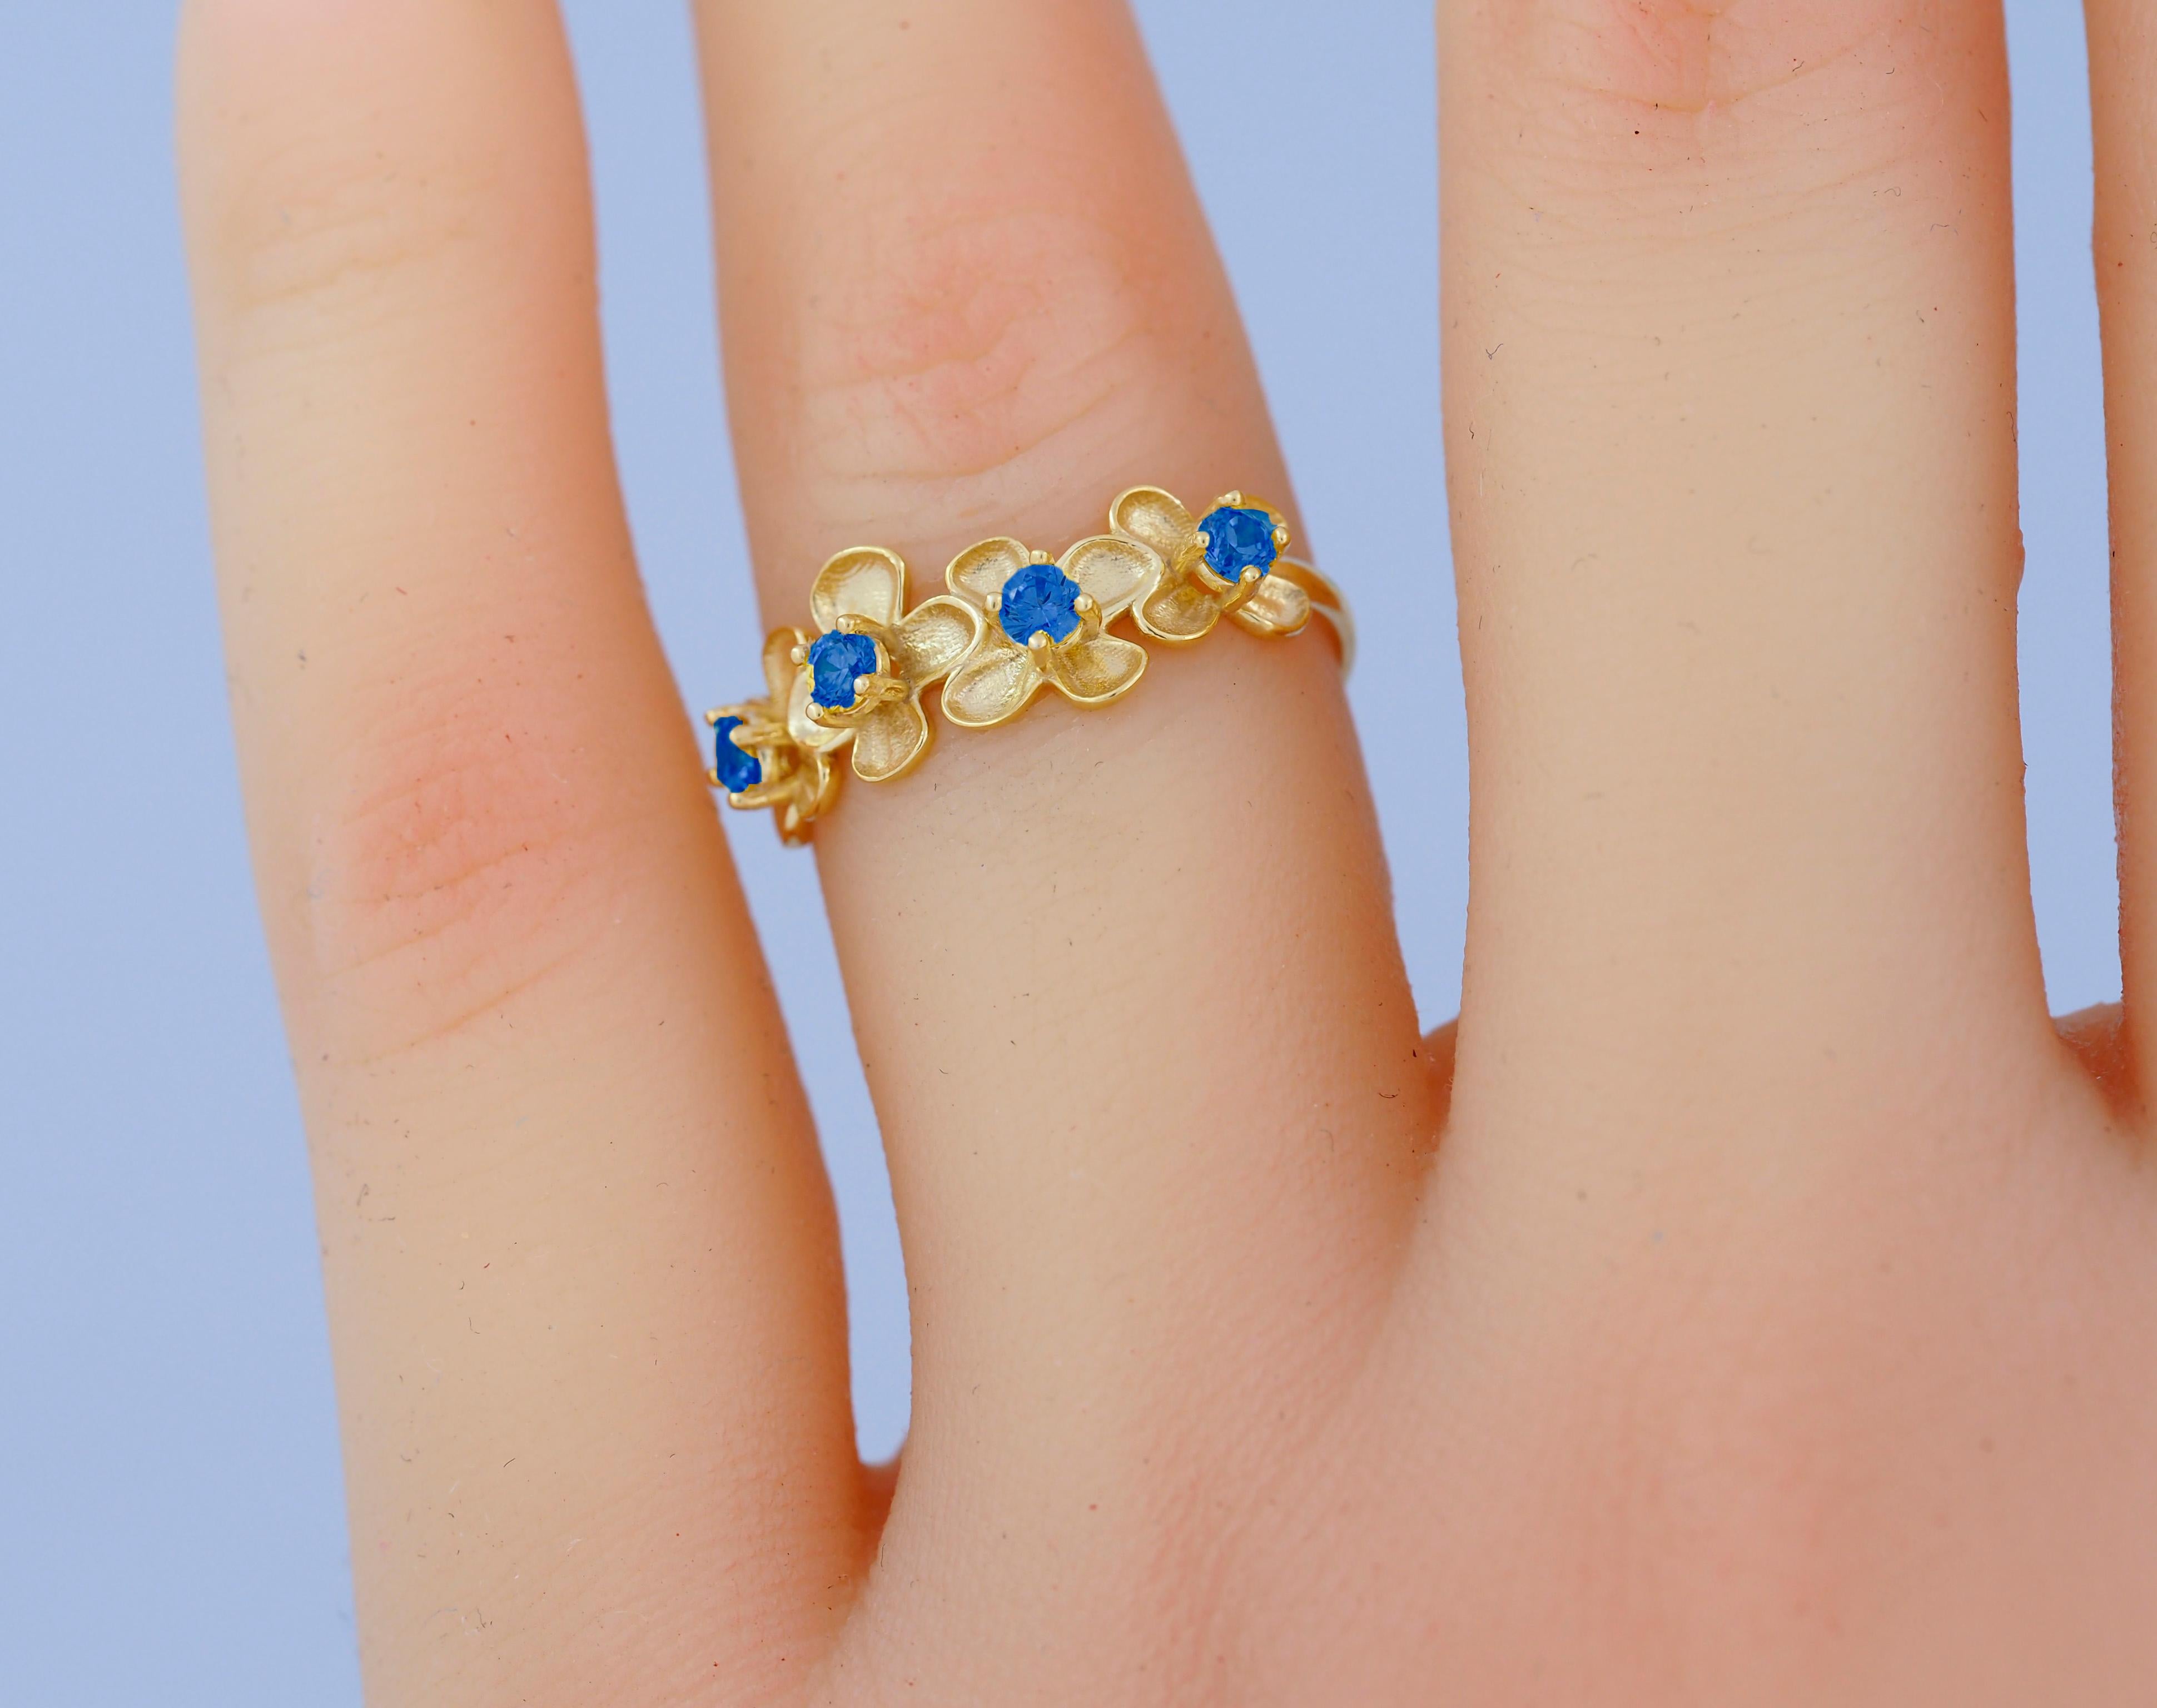 Flower 14k gold ring
Lab sapphires 14k gold ring. Daisy flower gold ring. Flower bouquet ring. Blue gemstone ring.

Metal: 14k solid gold
Weight: 2 gr depends from size

Gemstones
Set with lab sapphires
Color - blue, 
Cut: round

In our shop you can